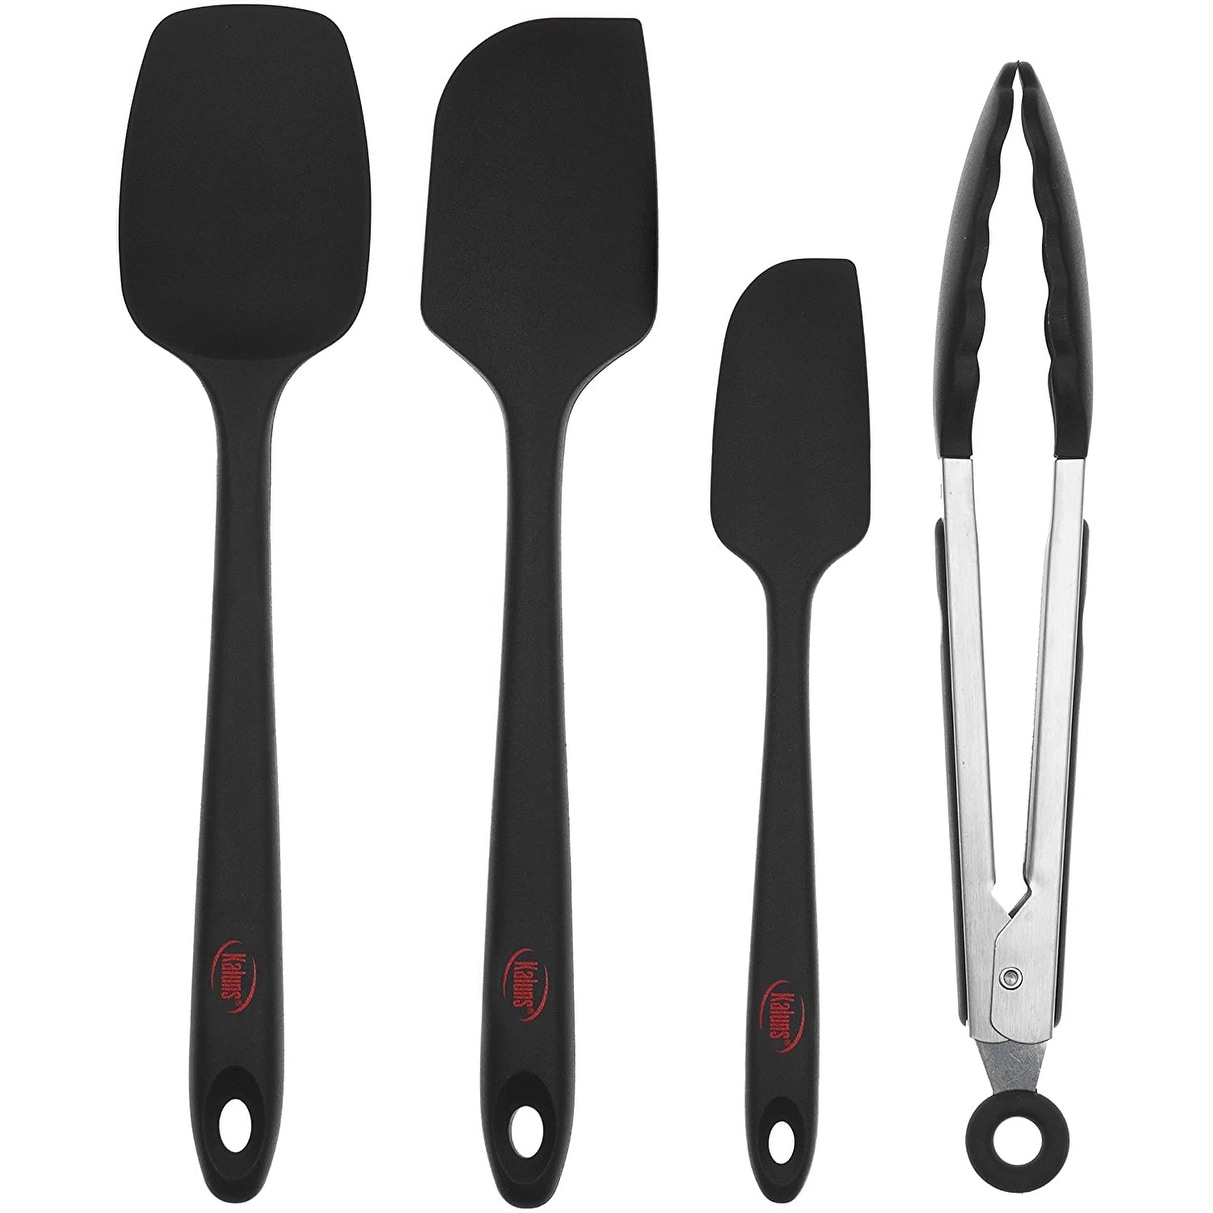 https://ak1.ostkcdn.com/images/products/is/images/direct/7f21f1ae3bd35be6505e0df5a7a16e4b3e084714/Kaluns-Silicone-Spatula-Set%2C-3-Rubber-Spatulas-and-One-Kitchen-Tongs%2C-Heat-Resistant%2C-Stainless-Steel-Core%2C-Kitchen-Tools.jpg